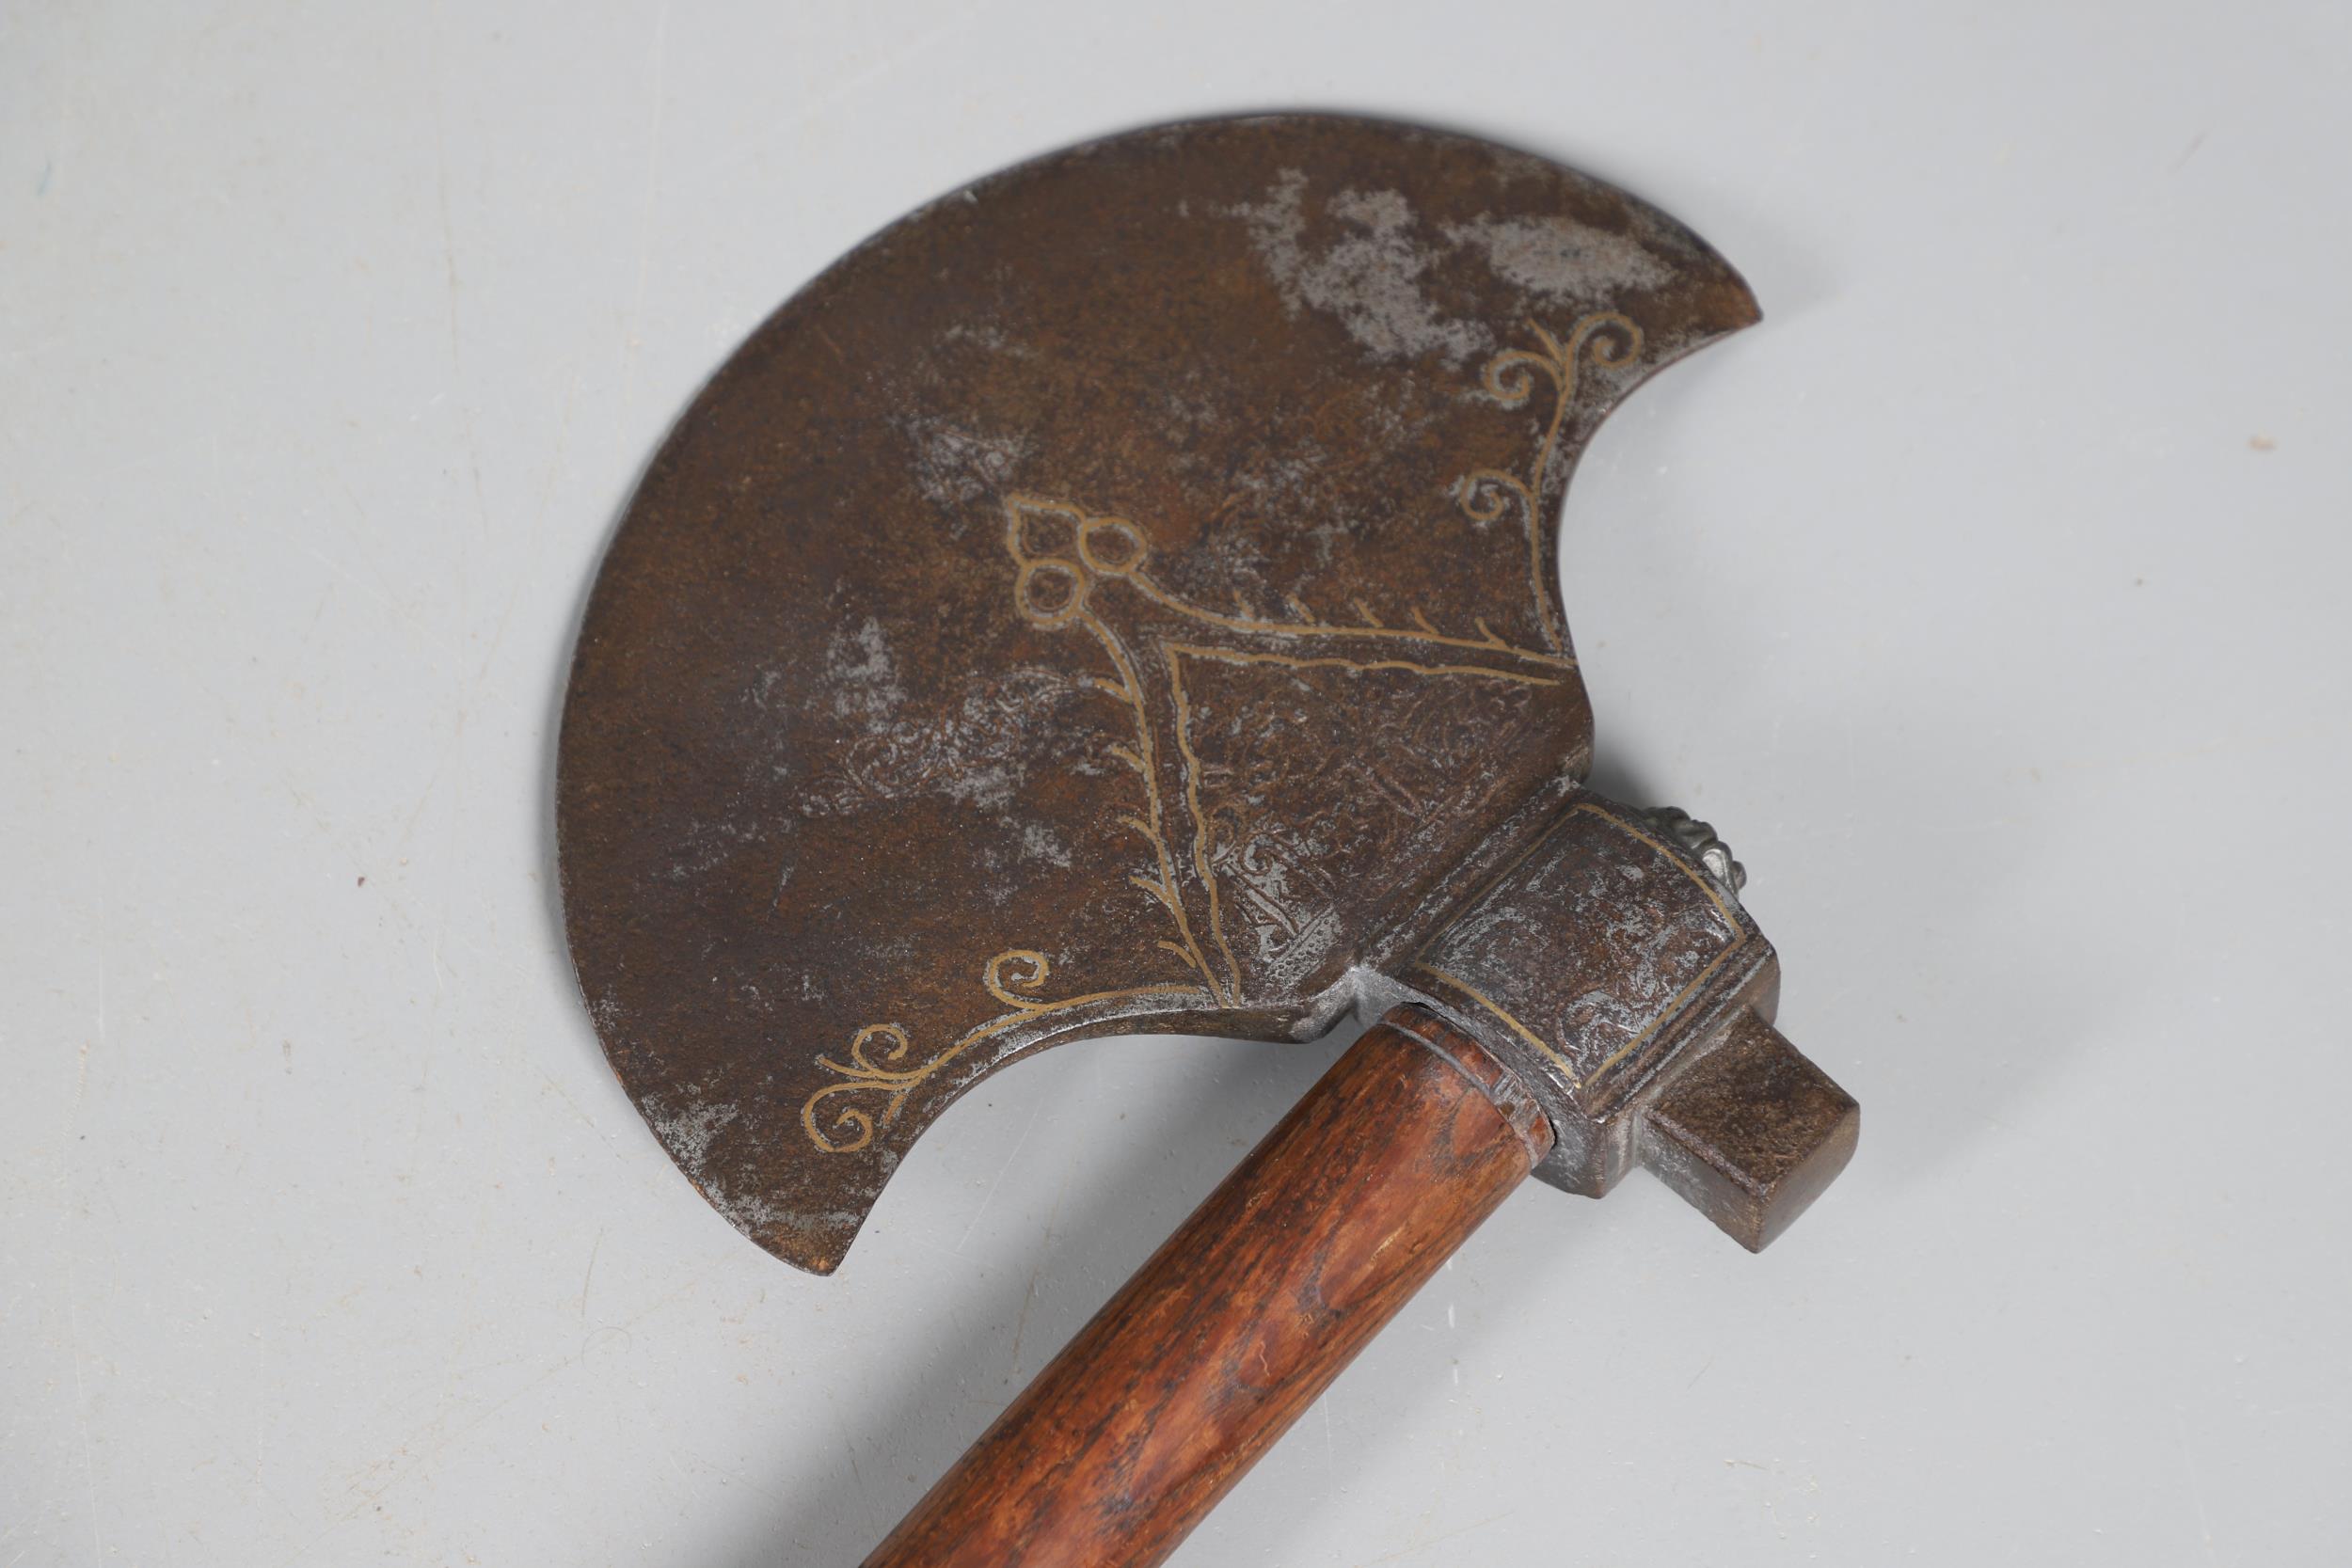 A SUBSTANTIAL PERSIAN OR OTTOMAN TWO HANDLED AXE. - Image 3 of 11